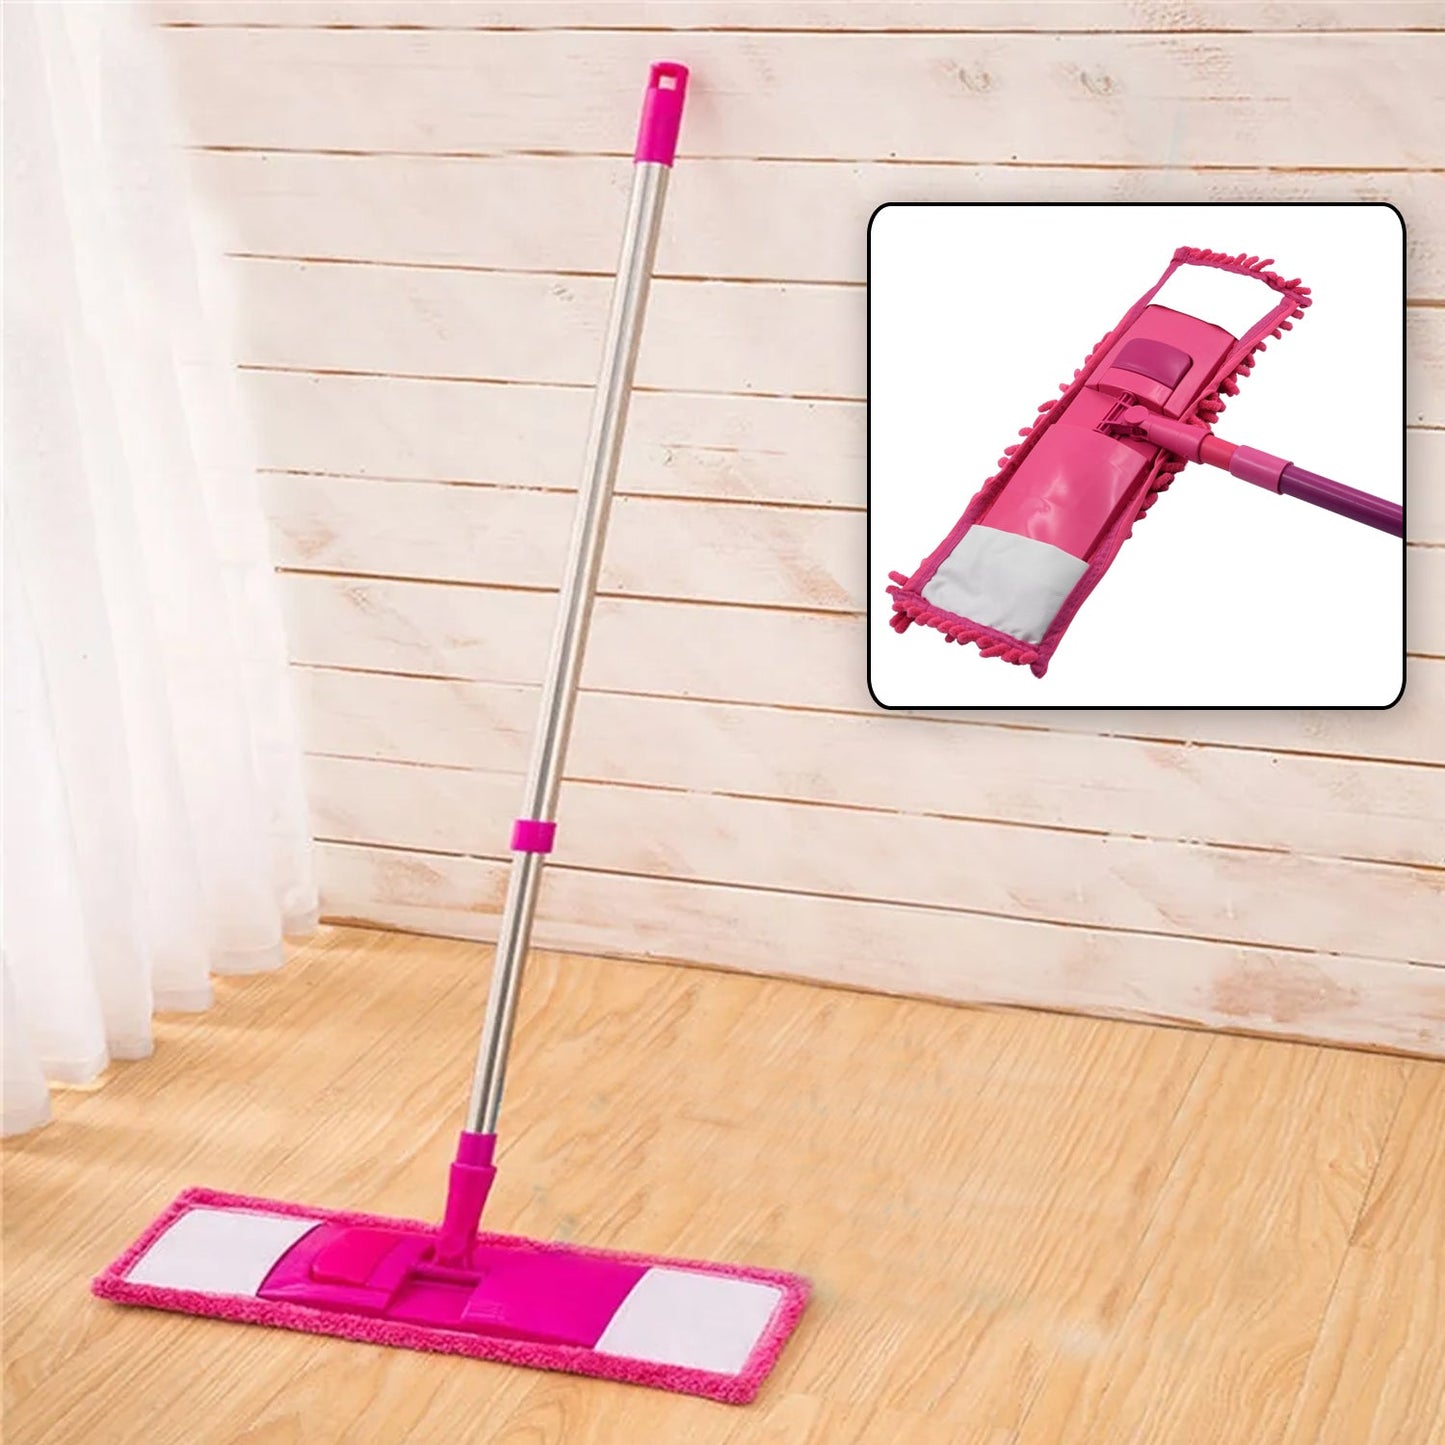 7734 Wet and Dry Cleaning Flat Microfiber Floor Cleaning Mop  Steel Rod Long Handle Dry Mop microfiber mop refill (No include Extra Refill 123cmx47cm)